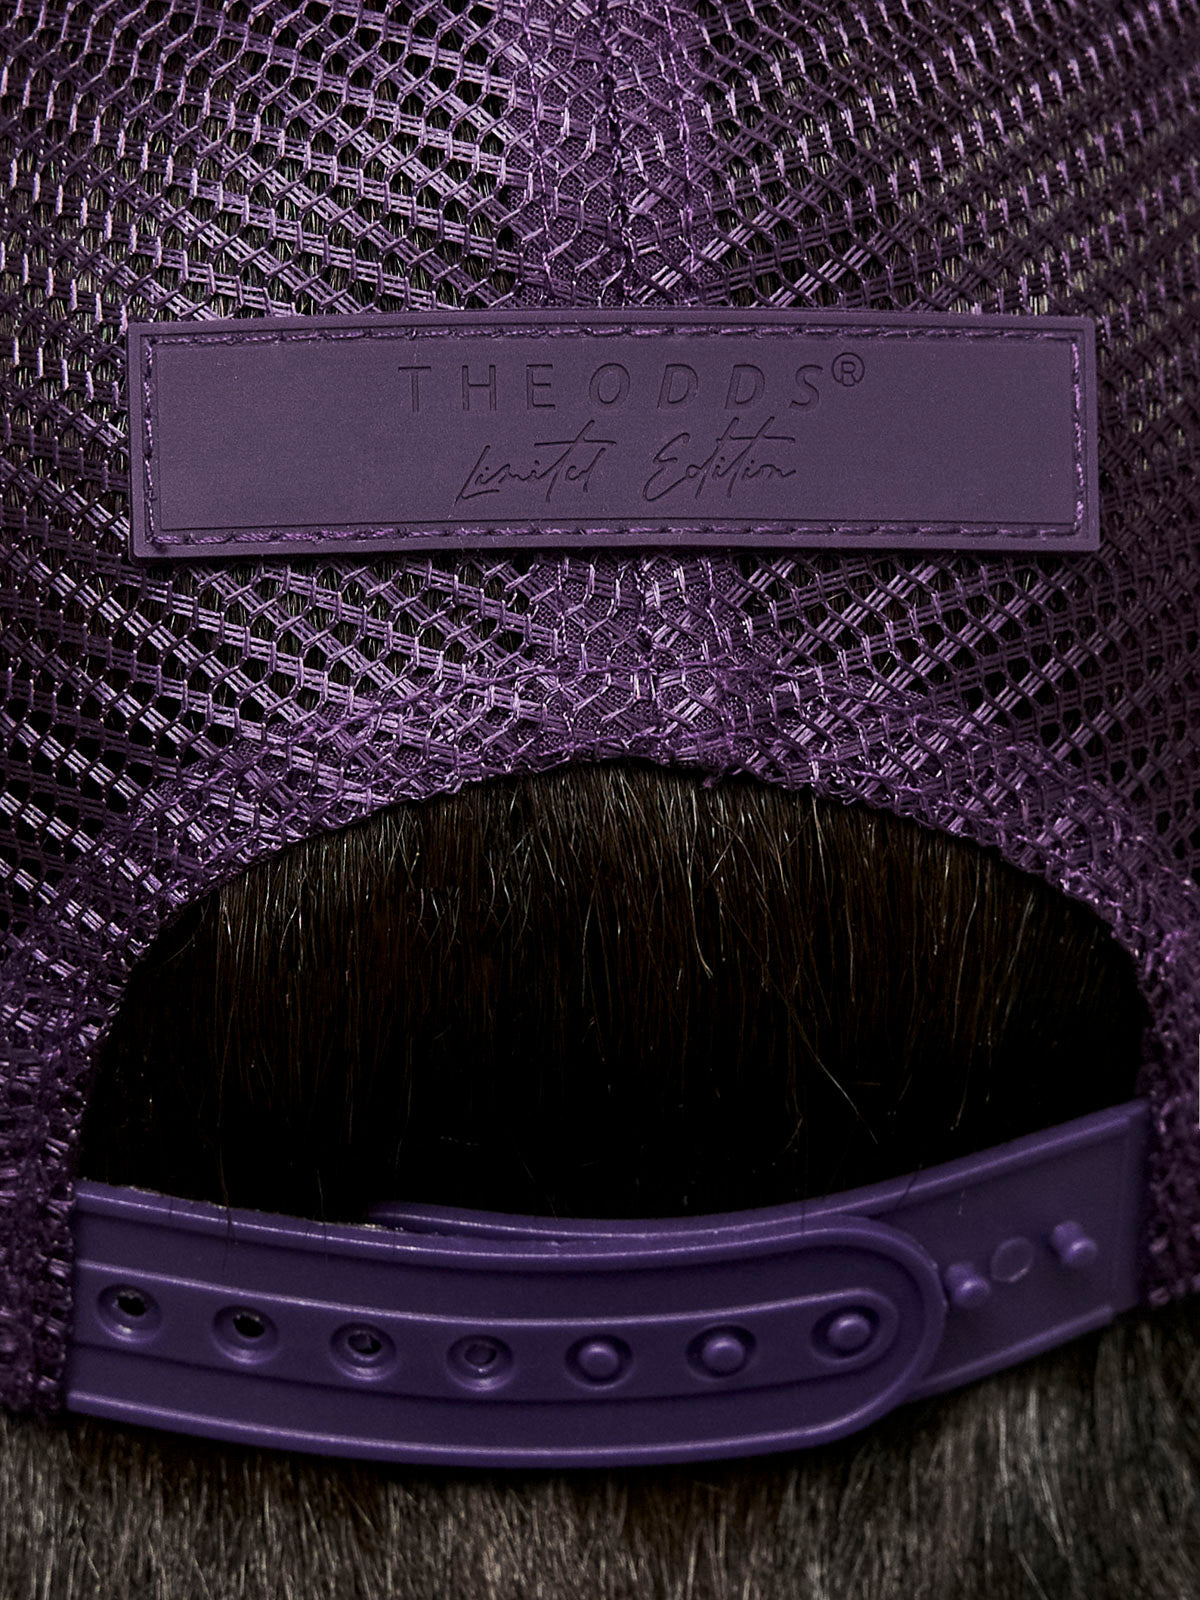 "I Wish The Next Pandemic Is Love" Mulberry Purple Trucker Cap/ LMTD edition